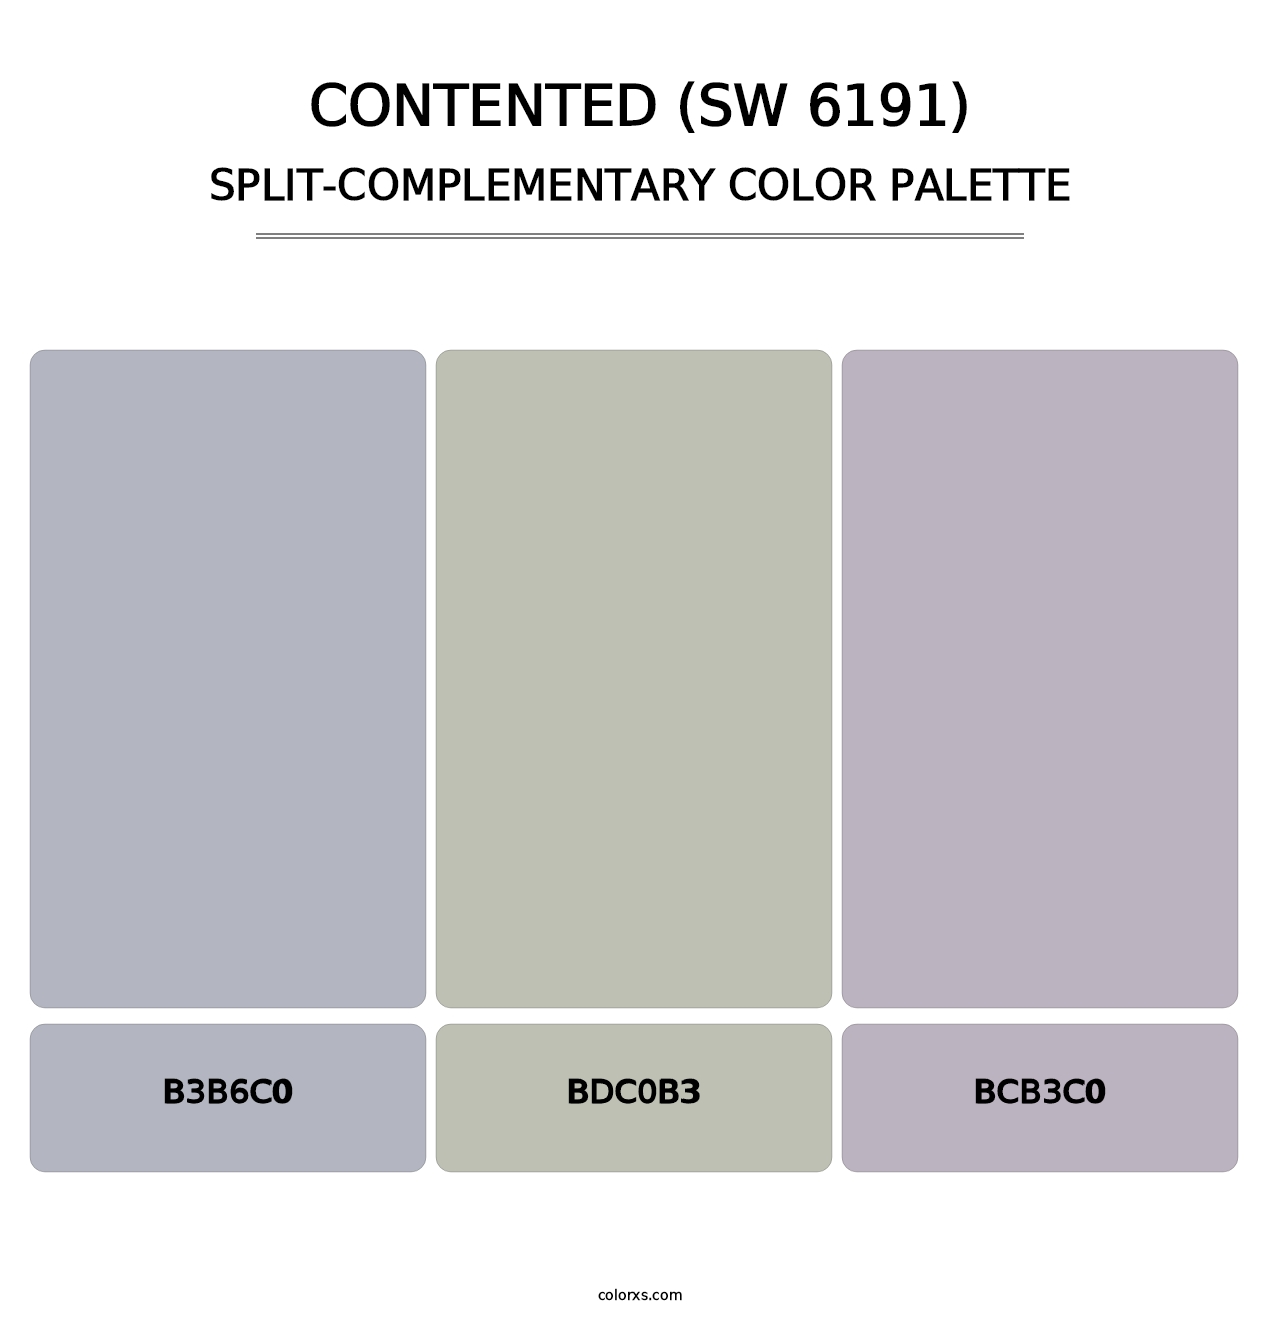 Contented (SW 6191) - Split-Complementary Color Palette